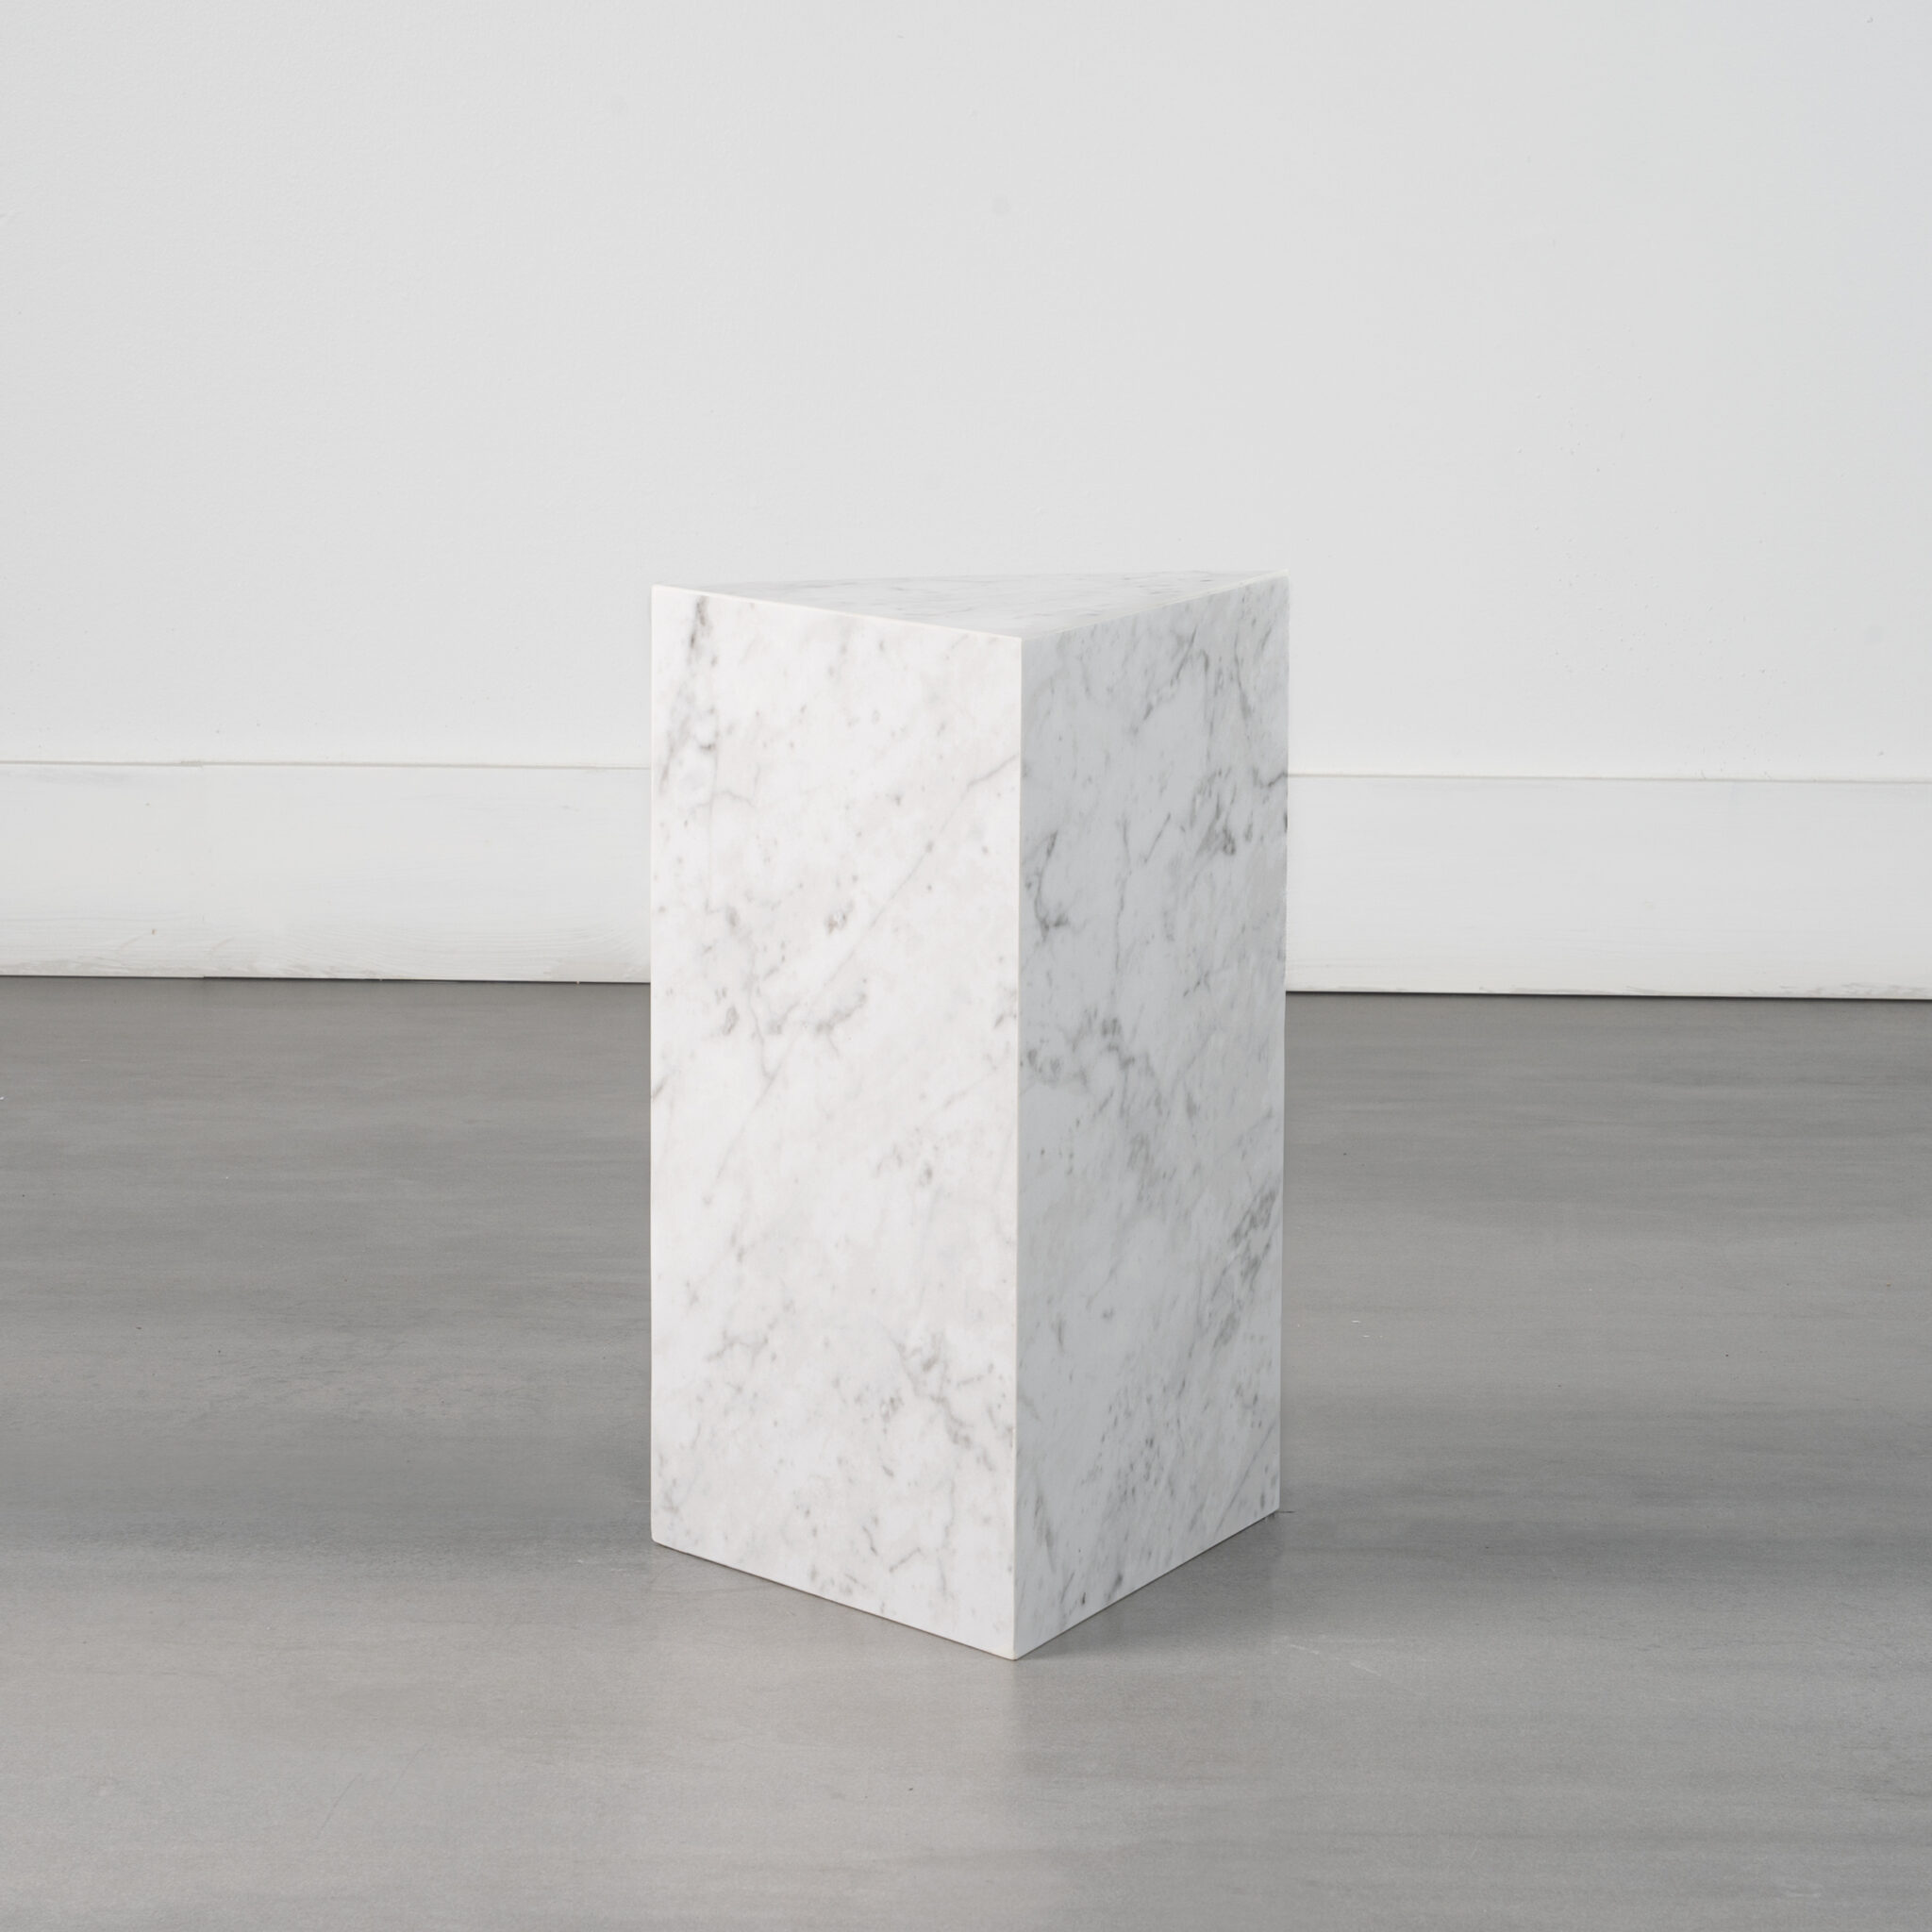 Triangle Side Table in Bianco Carrara Large-format Porcelain